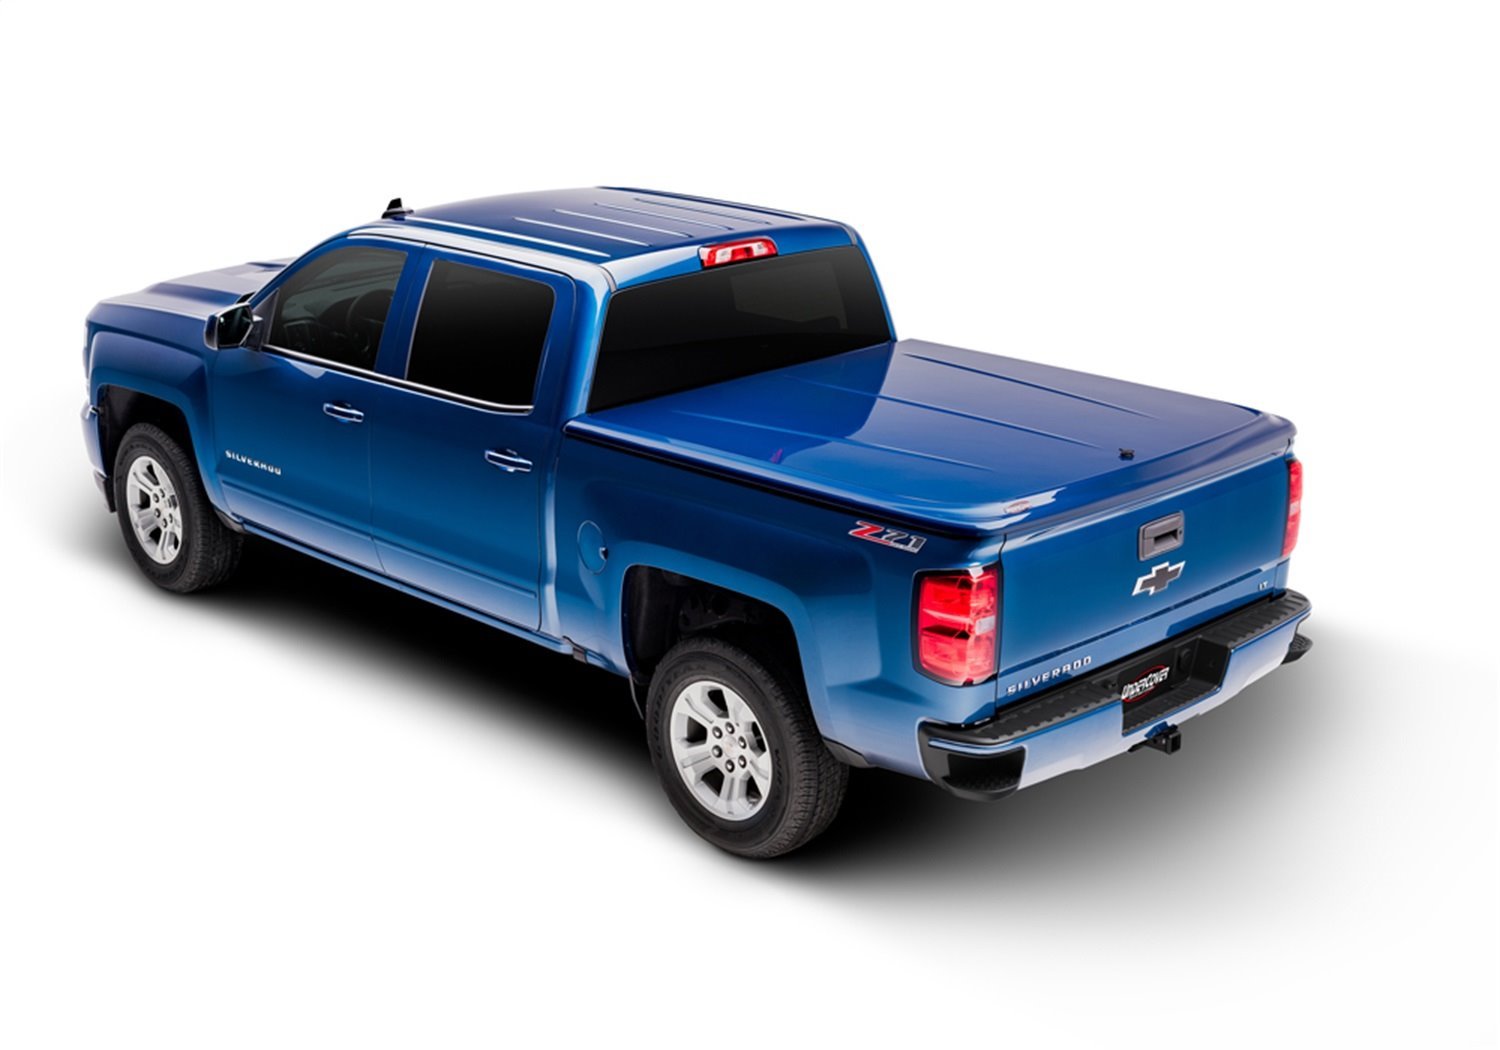 UC2146L-UJ LUX Hard Non-Folding Cover, 2009-2014 Ford F-150 5'7" Bed EXT/Crew Cab, UJ Sterling Gray